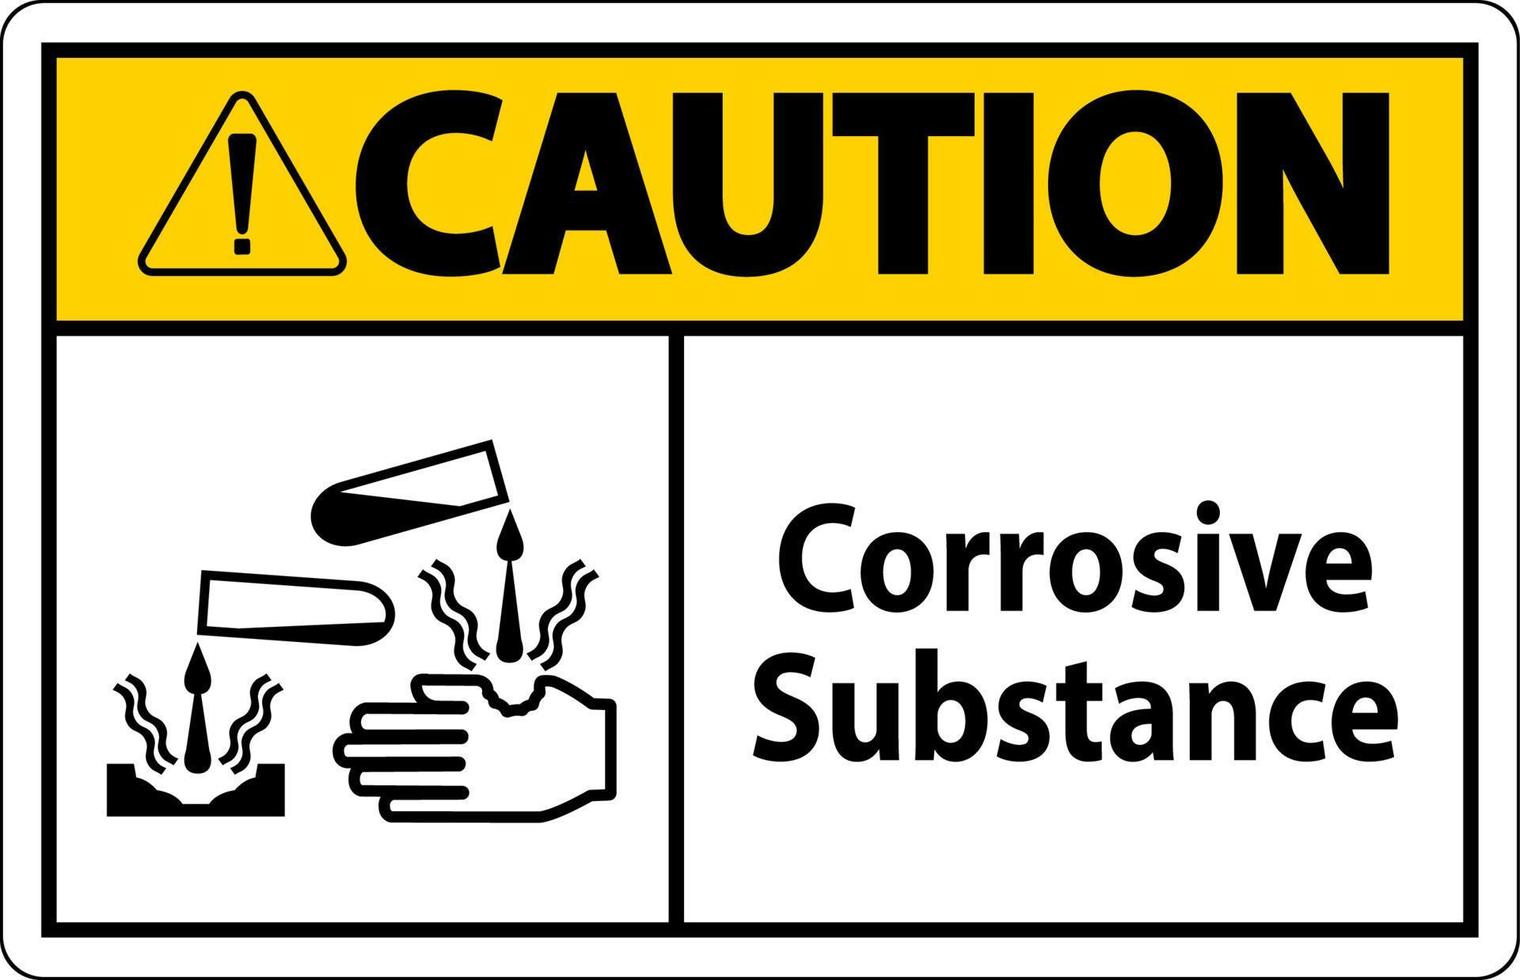 Caution Sign Corrosive Substance On White Background vector